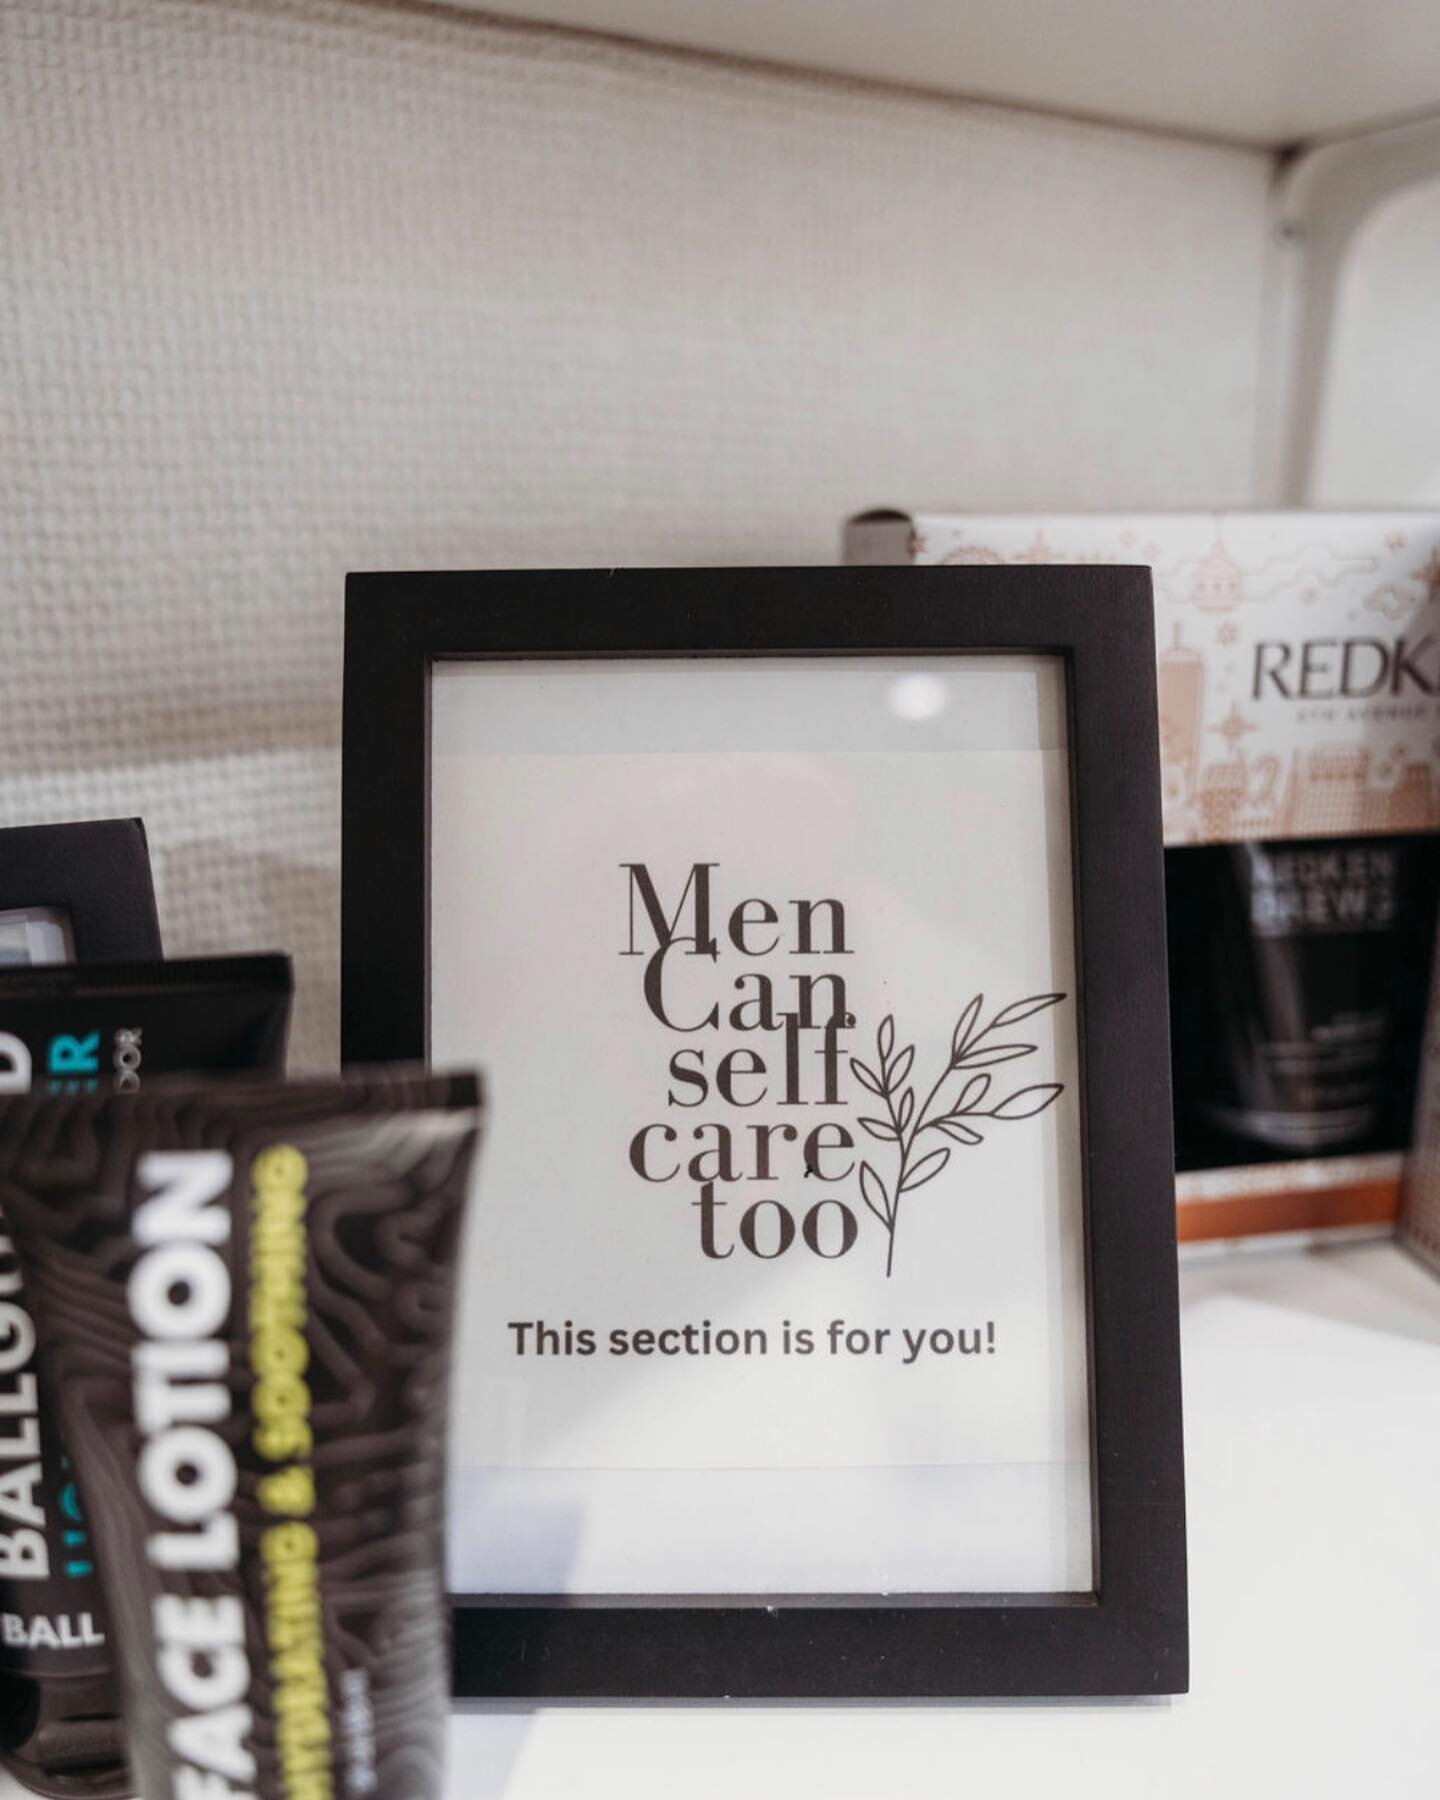 Men can self care too!!! We have all the products for them too!! Check out our products!! 💕
.
Photo by @hey.its.me.amber 
.
#Wedding #earthlybeauty #earthlybeautybar #cda #cdaidaho #idaho #idahome #idahostylist #hair #salon #luxury #luxurysalon #cda